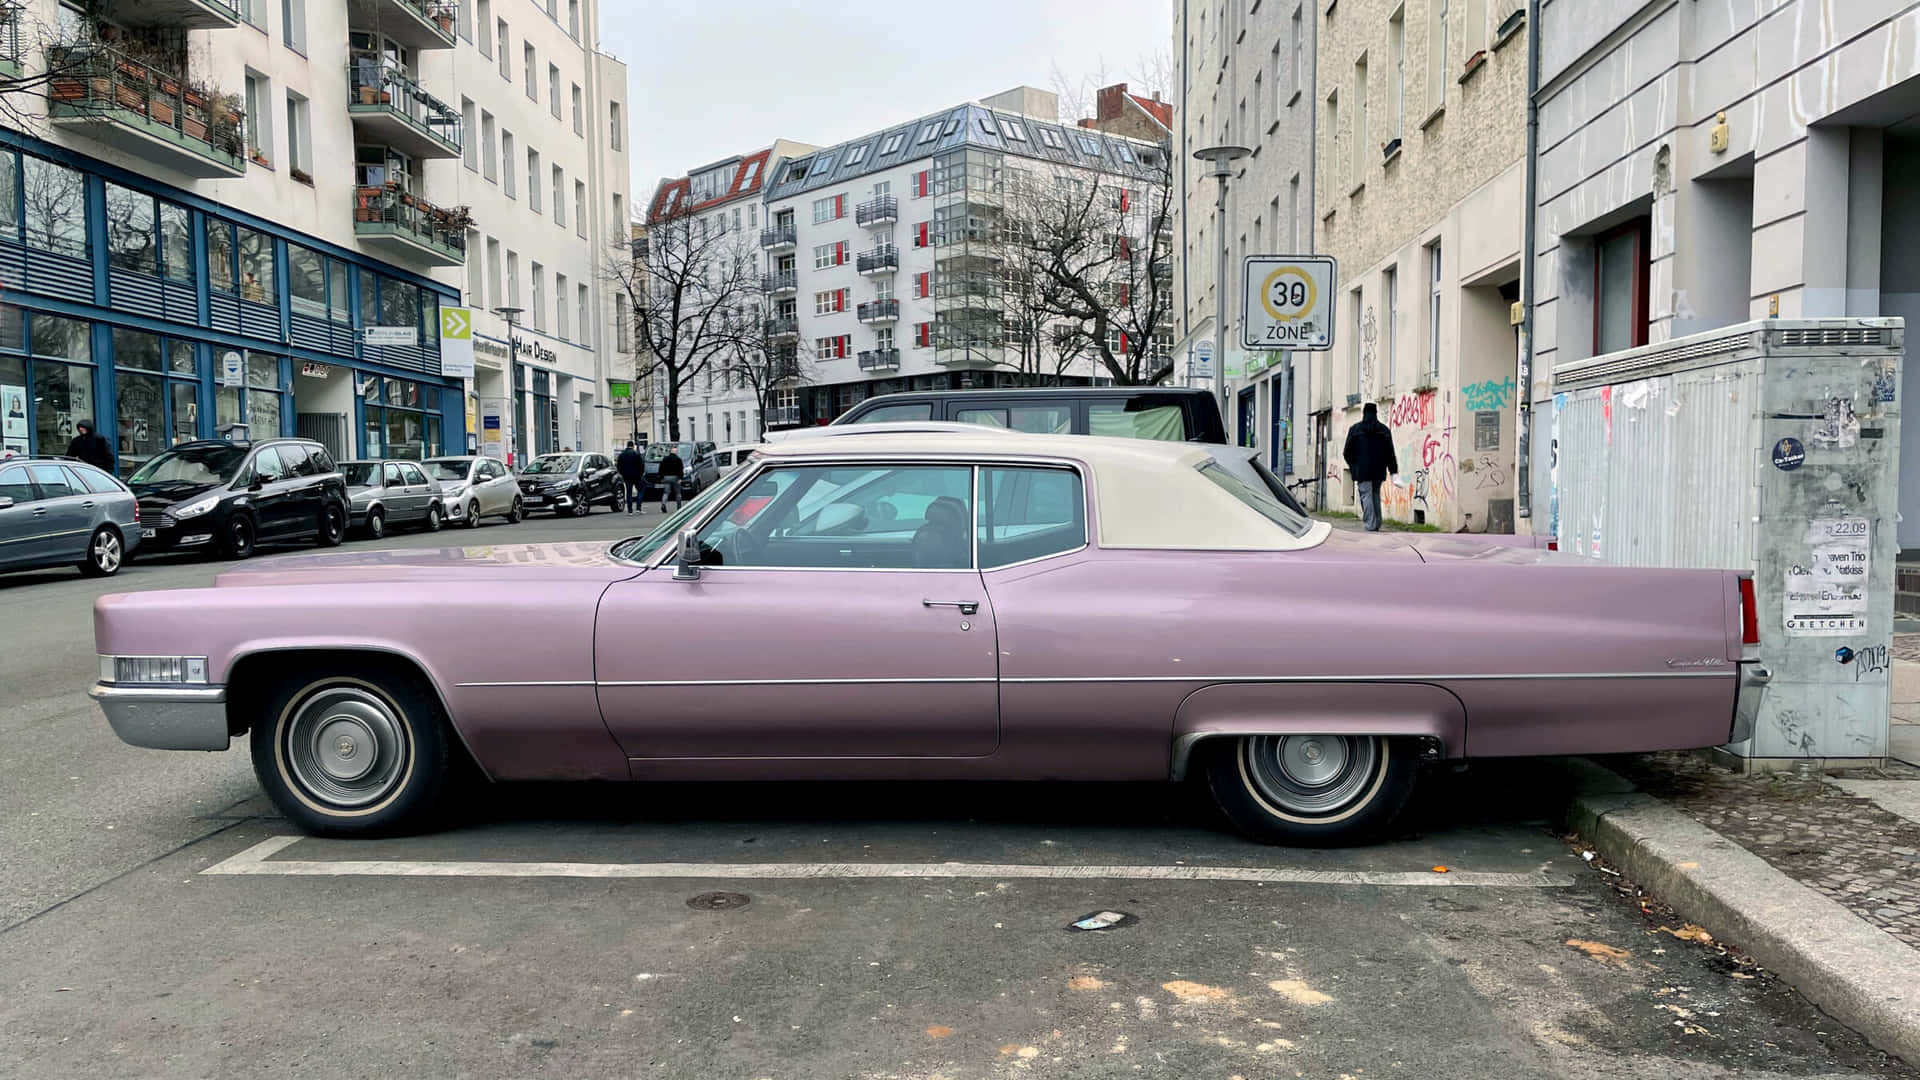 Vintage Pink Cadillac in the City Wallpaper